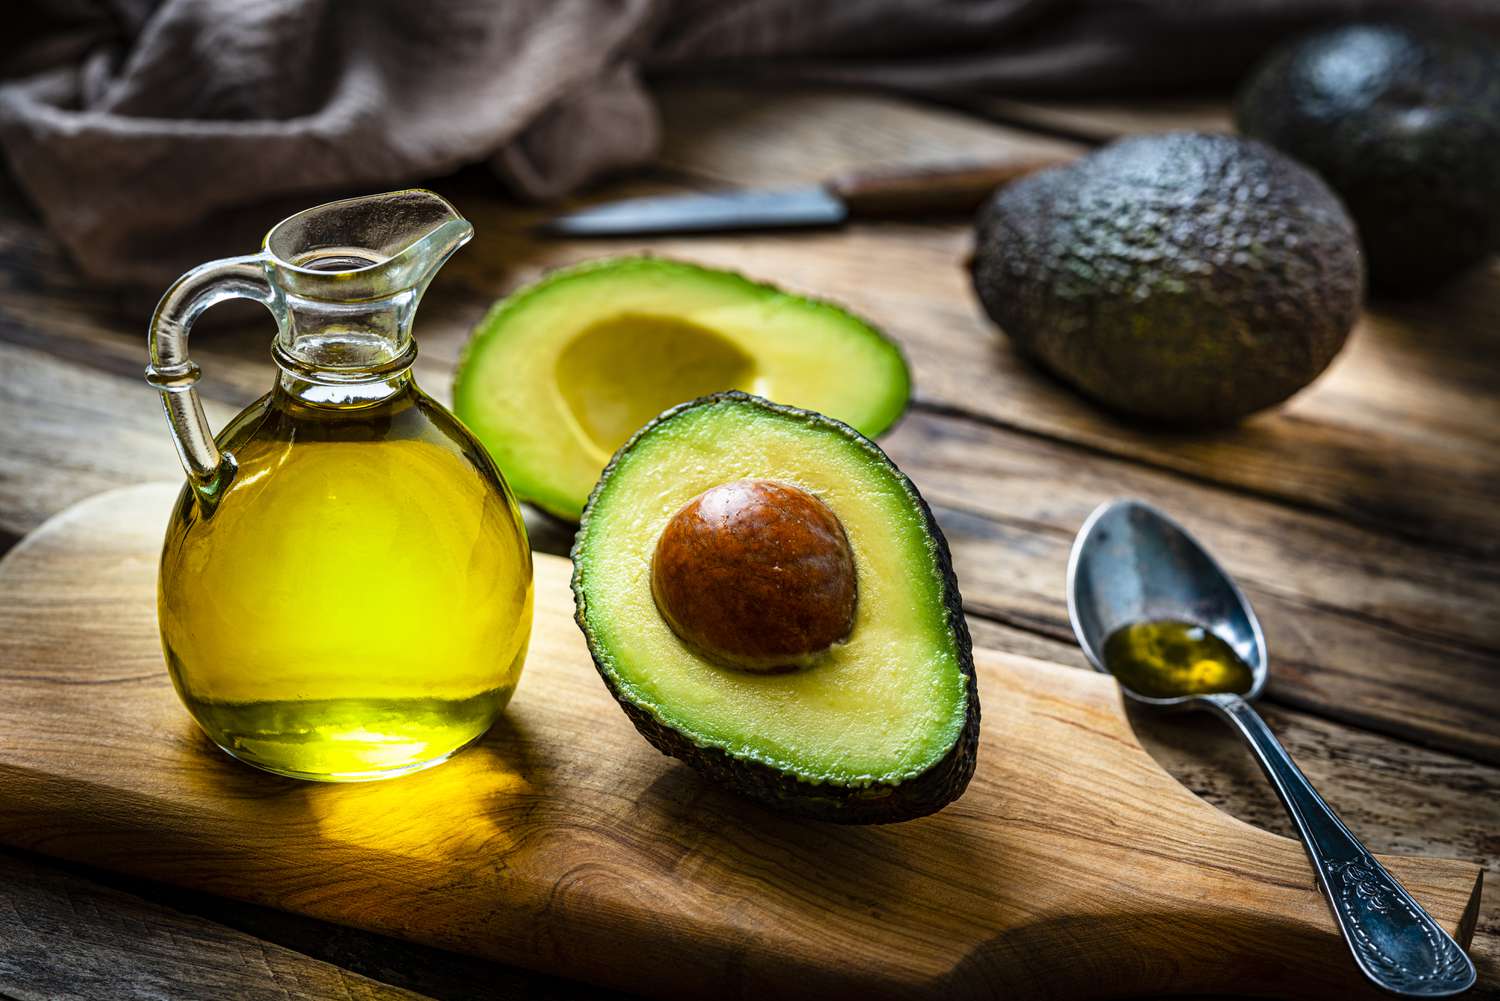 A bottle of avocado oil and a halved avocado on a wooden board, with a spoon of avocado oil beside them.